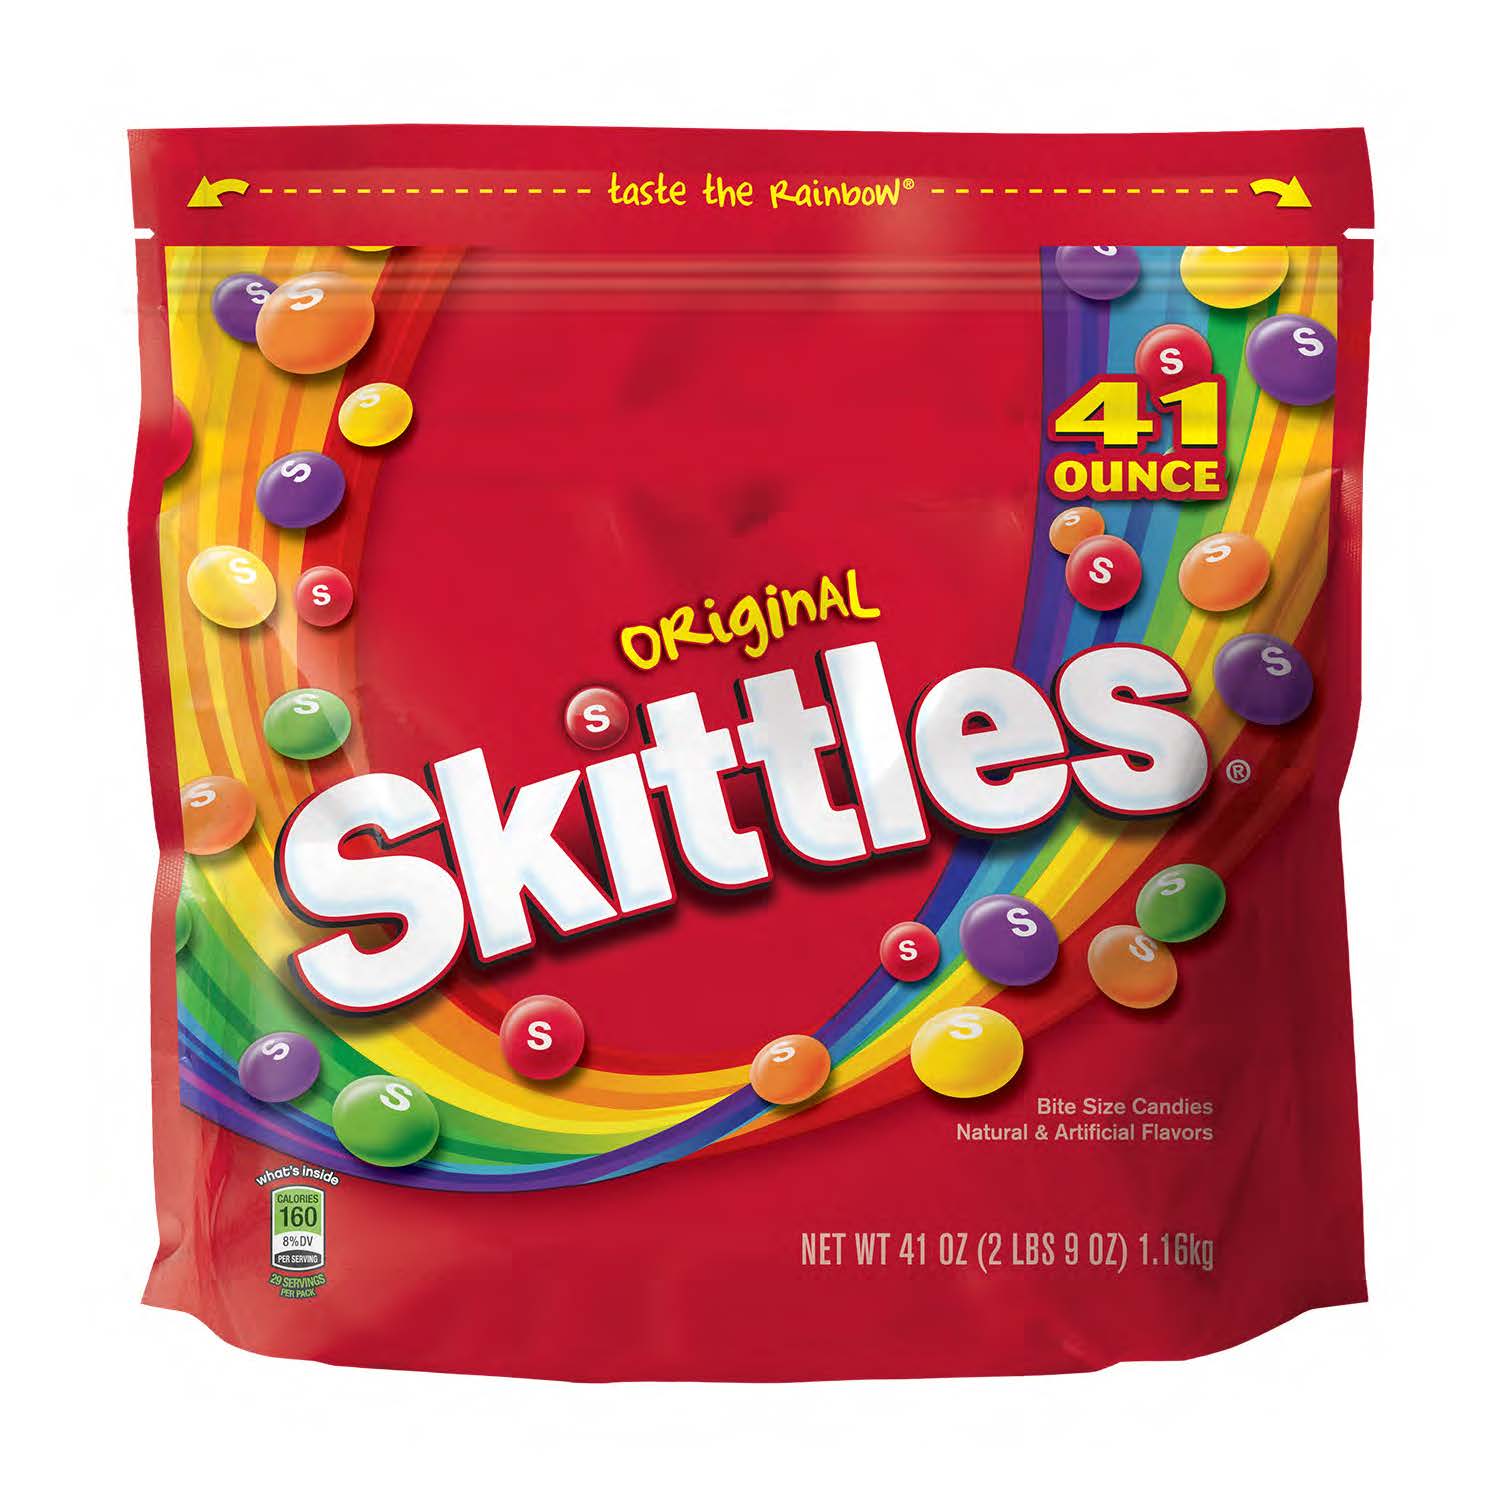 Skittles Original Fruity Candy, 41 Ounce Party Size Bag - image 1 of 9